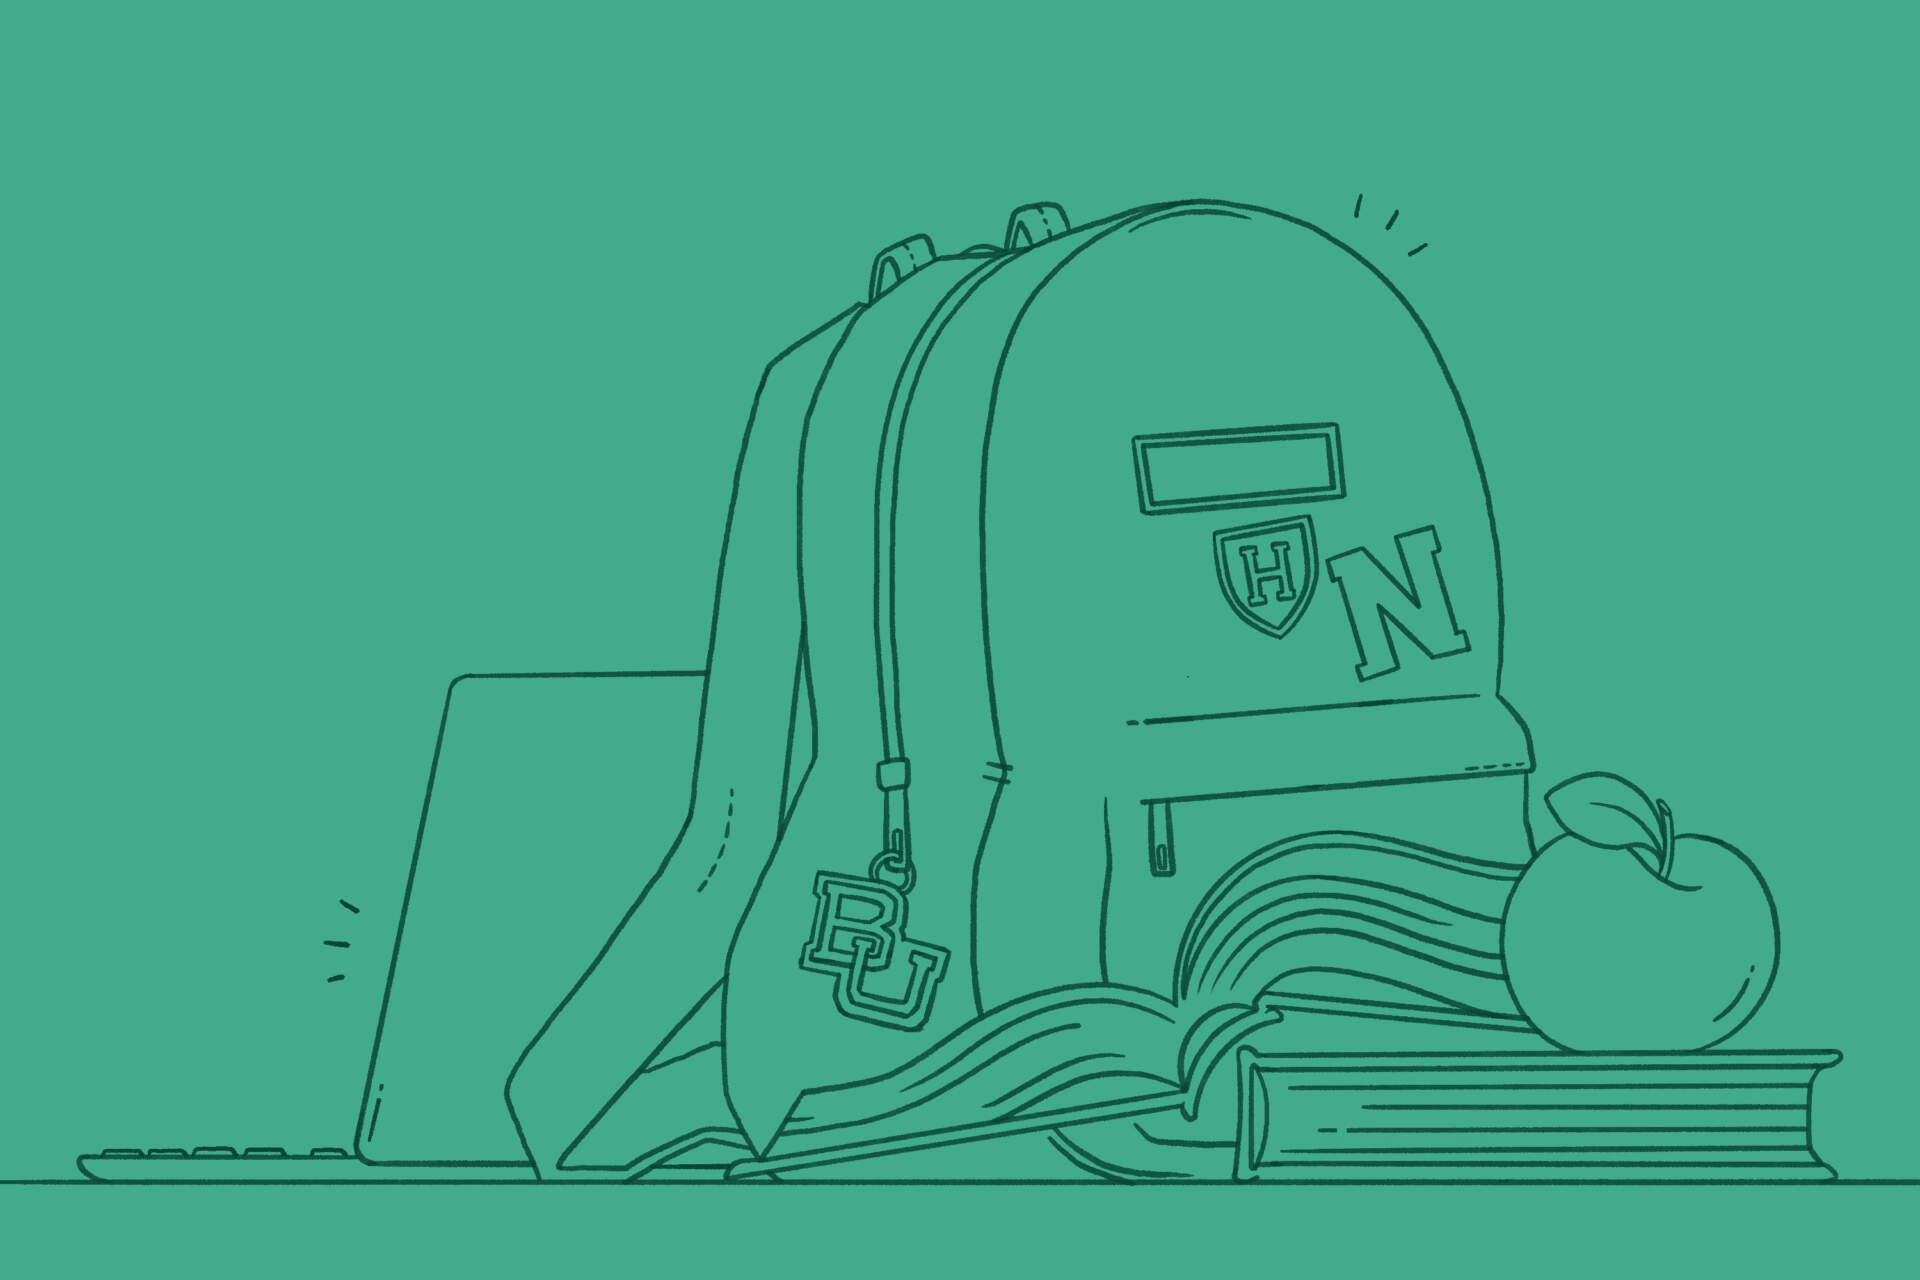 An illustration of books and a backpack with logo for Boston-area colleges. (Midoriko Grace Abe for WBUR)